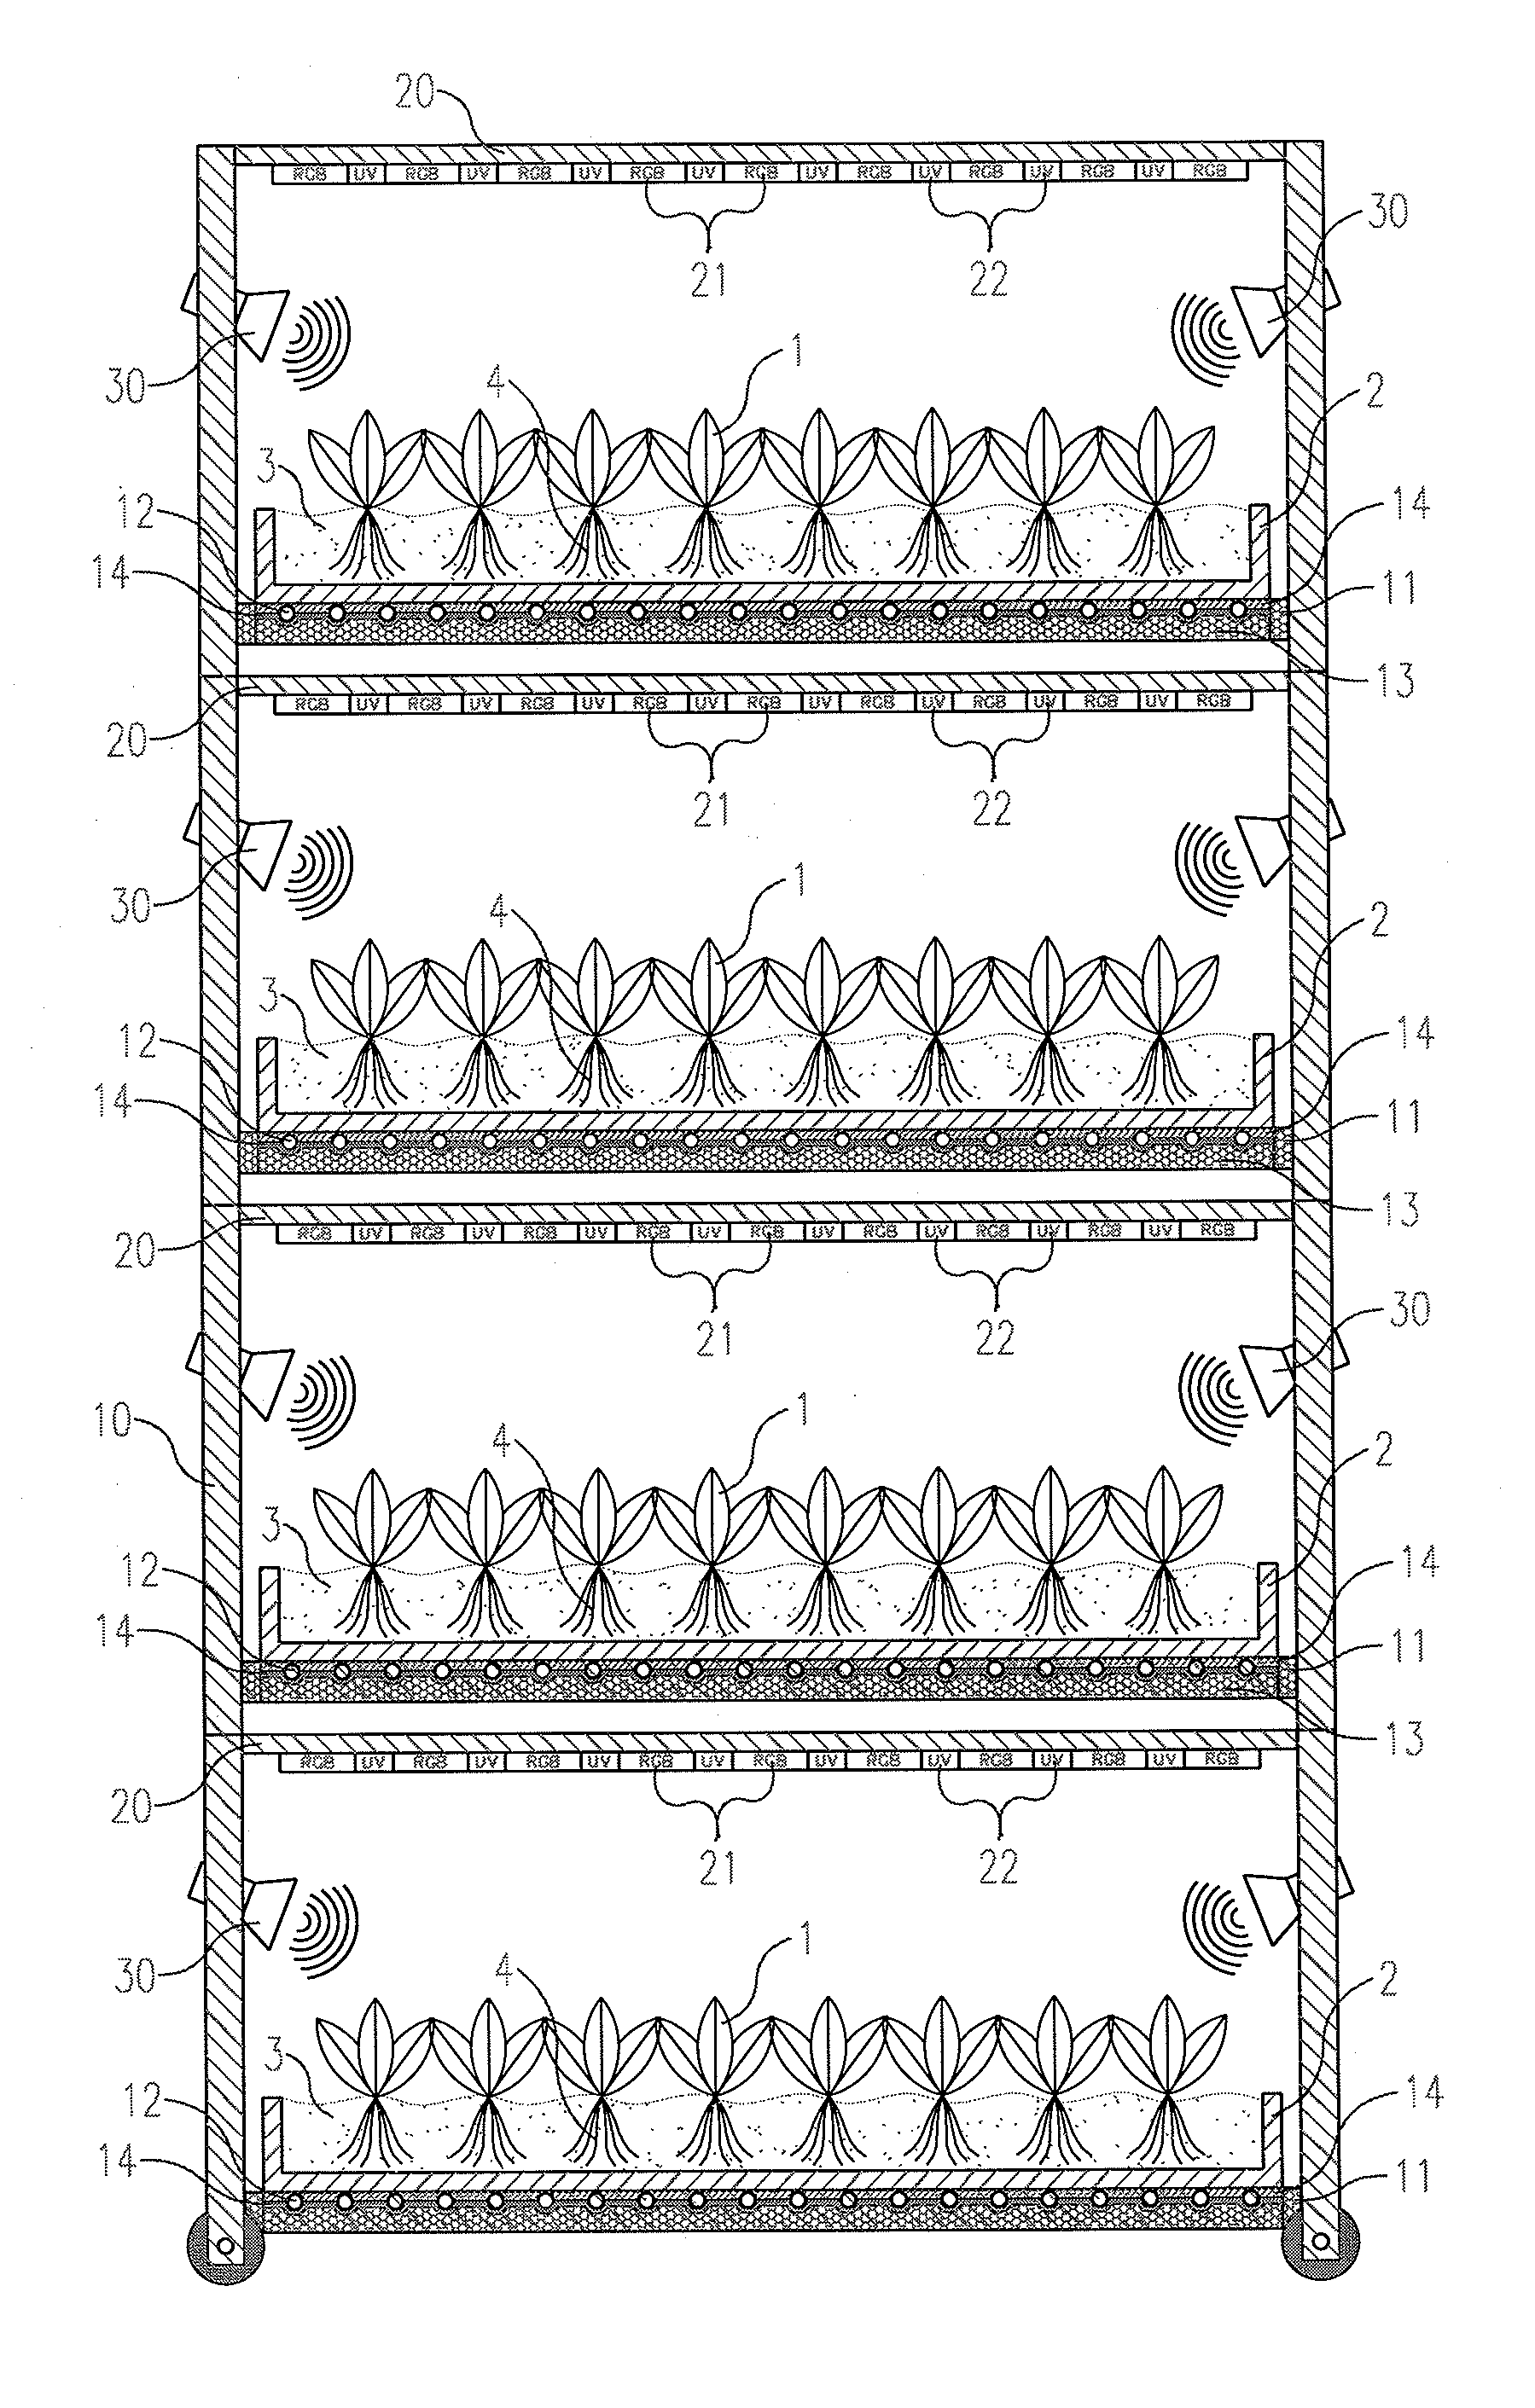 System and method for growing a plant in an at least partly conditioned environment